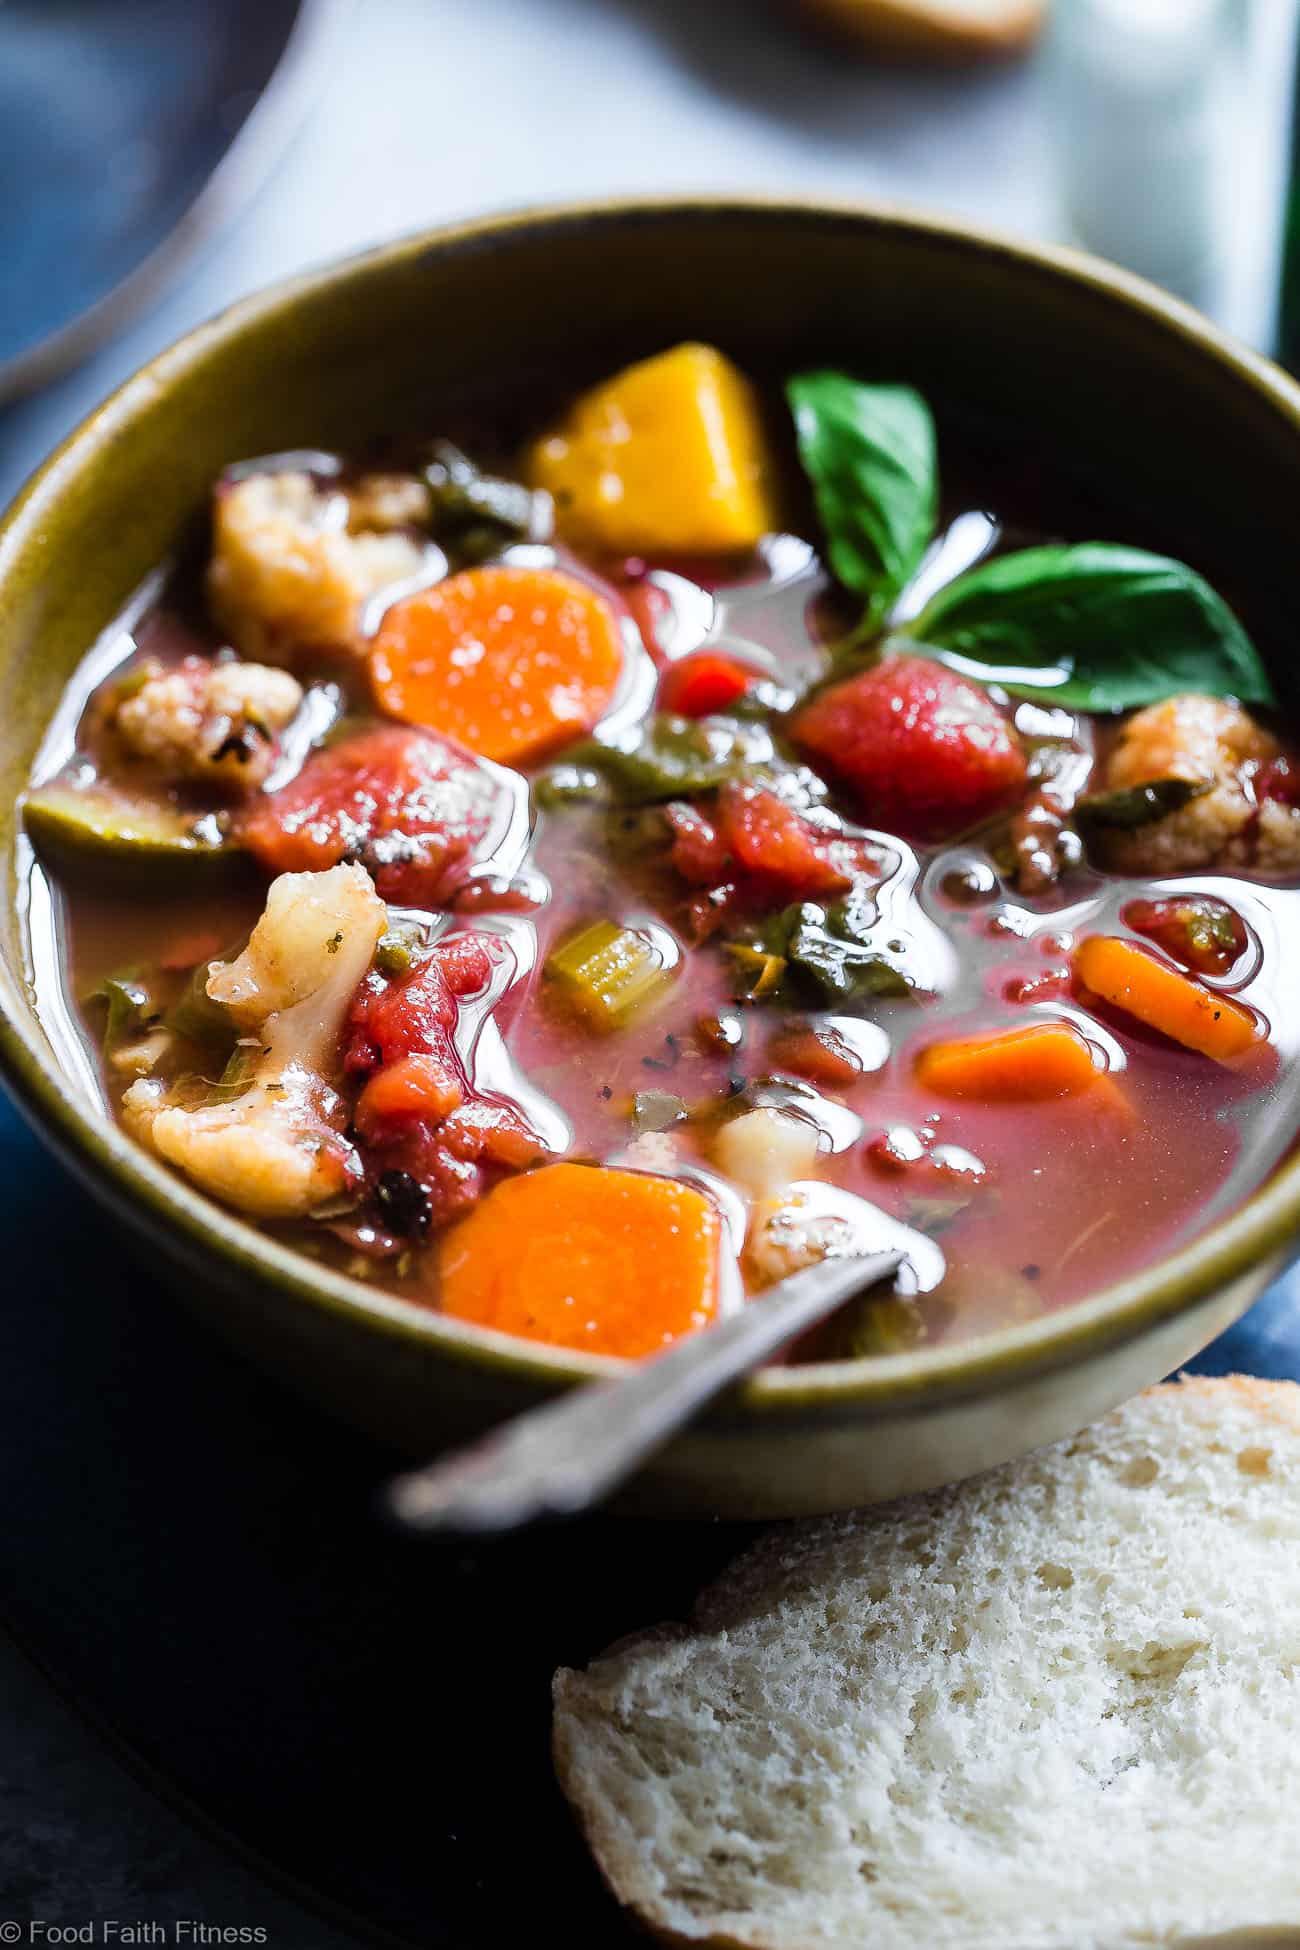 Easy Homemade Crockpot Vegetable Soup - Let the crockpot do the work for you with this recipe for vegetable soup that is a whole30, paleo and vegan dinner with only 1 SmartPoint and 85 calories! A family friendly dinner for busy weeknights that will please the pickiest of eaters! | Foodfaithfitness.com | @FoodFaithFit